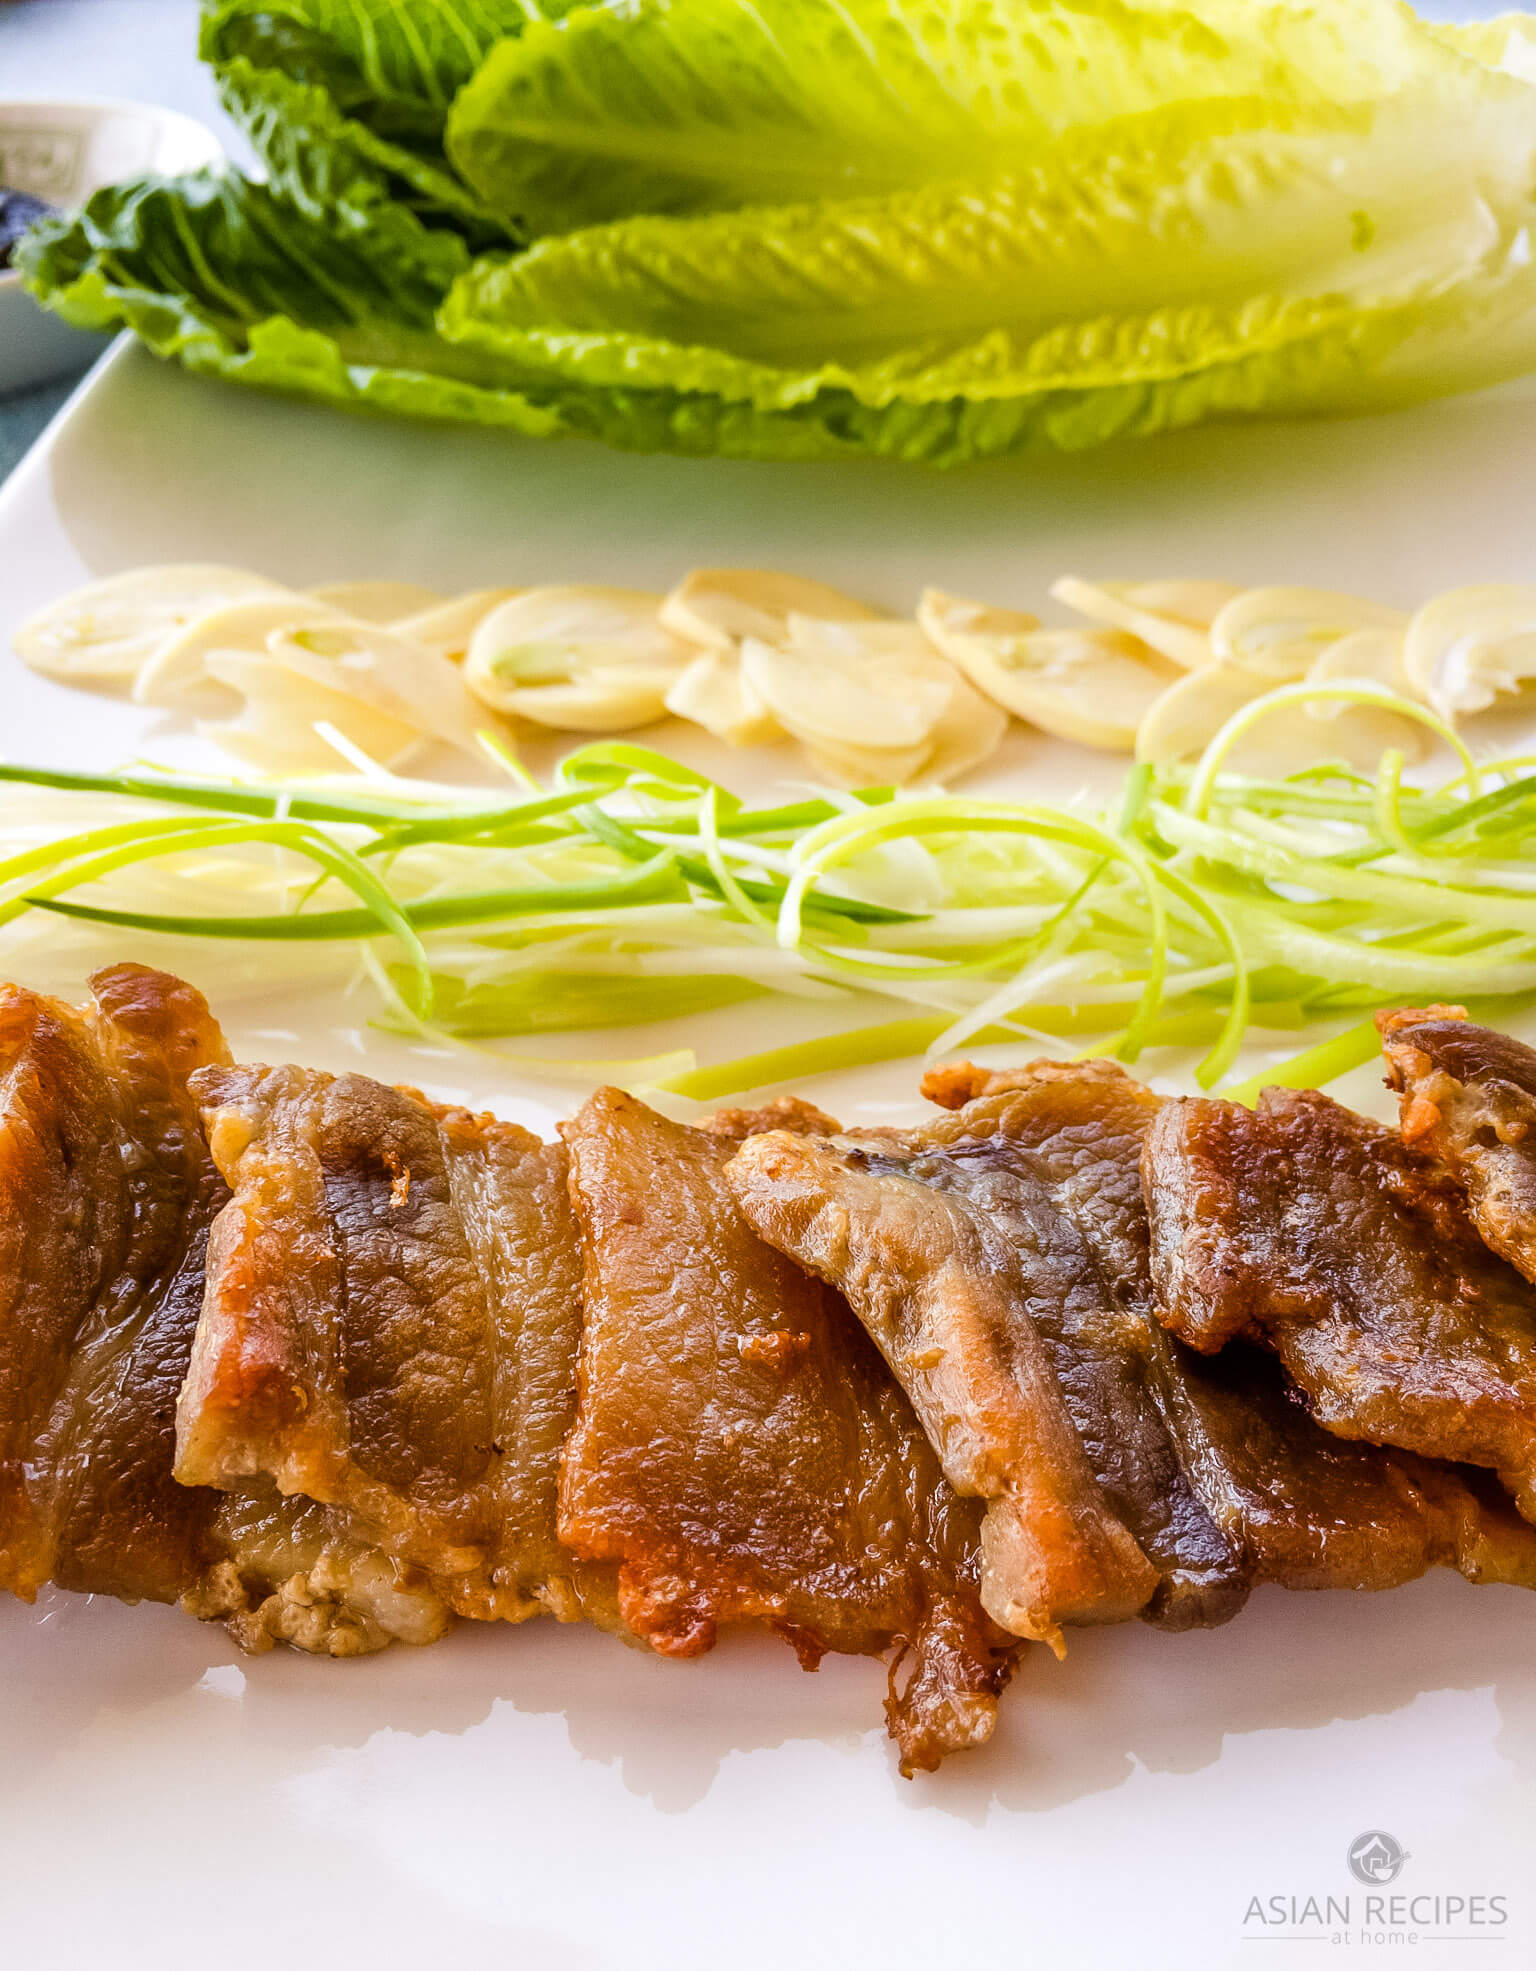 This is one of the more popular Korean BBQ options which consists of pan-fried sliced pork belly, fresh romaine lettuce leaves, sliced garlic, sesame oil, and gochujang.